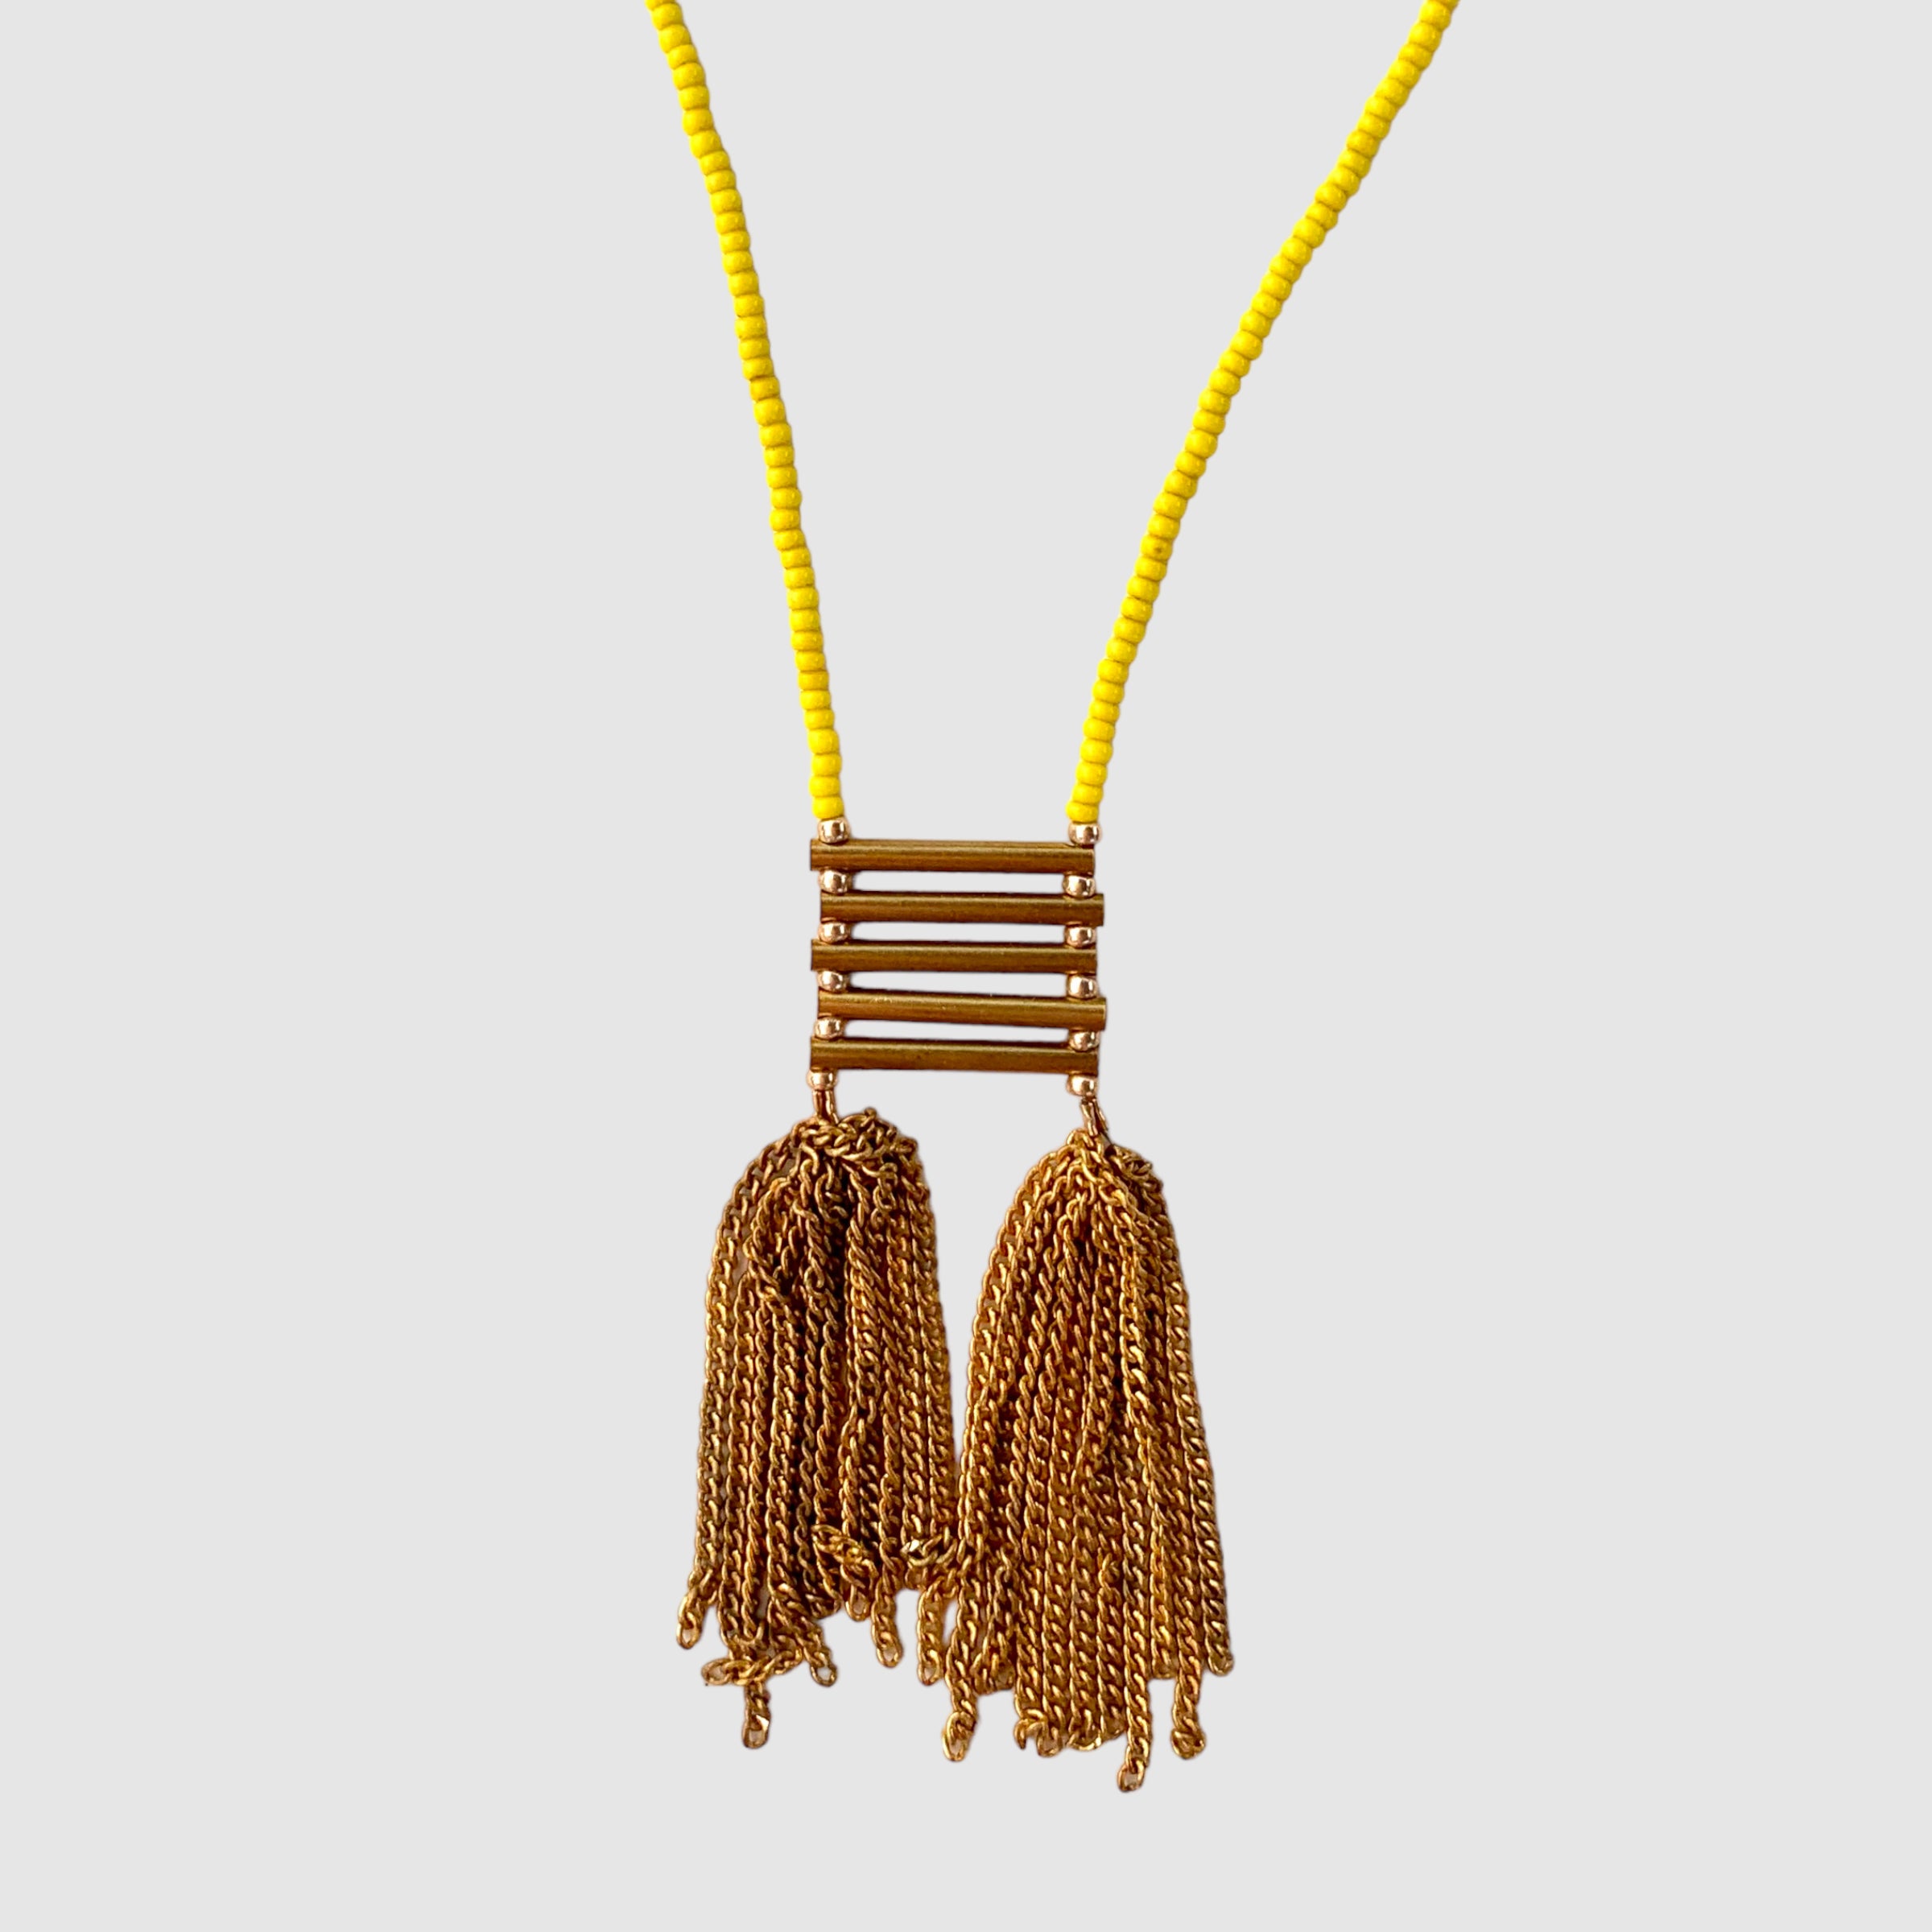 NOMAD // TRAVEL NECKLACE // YELLOW